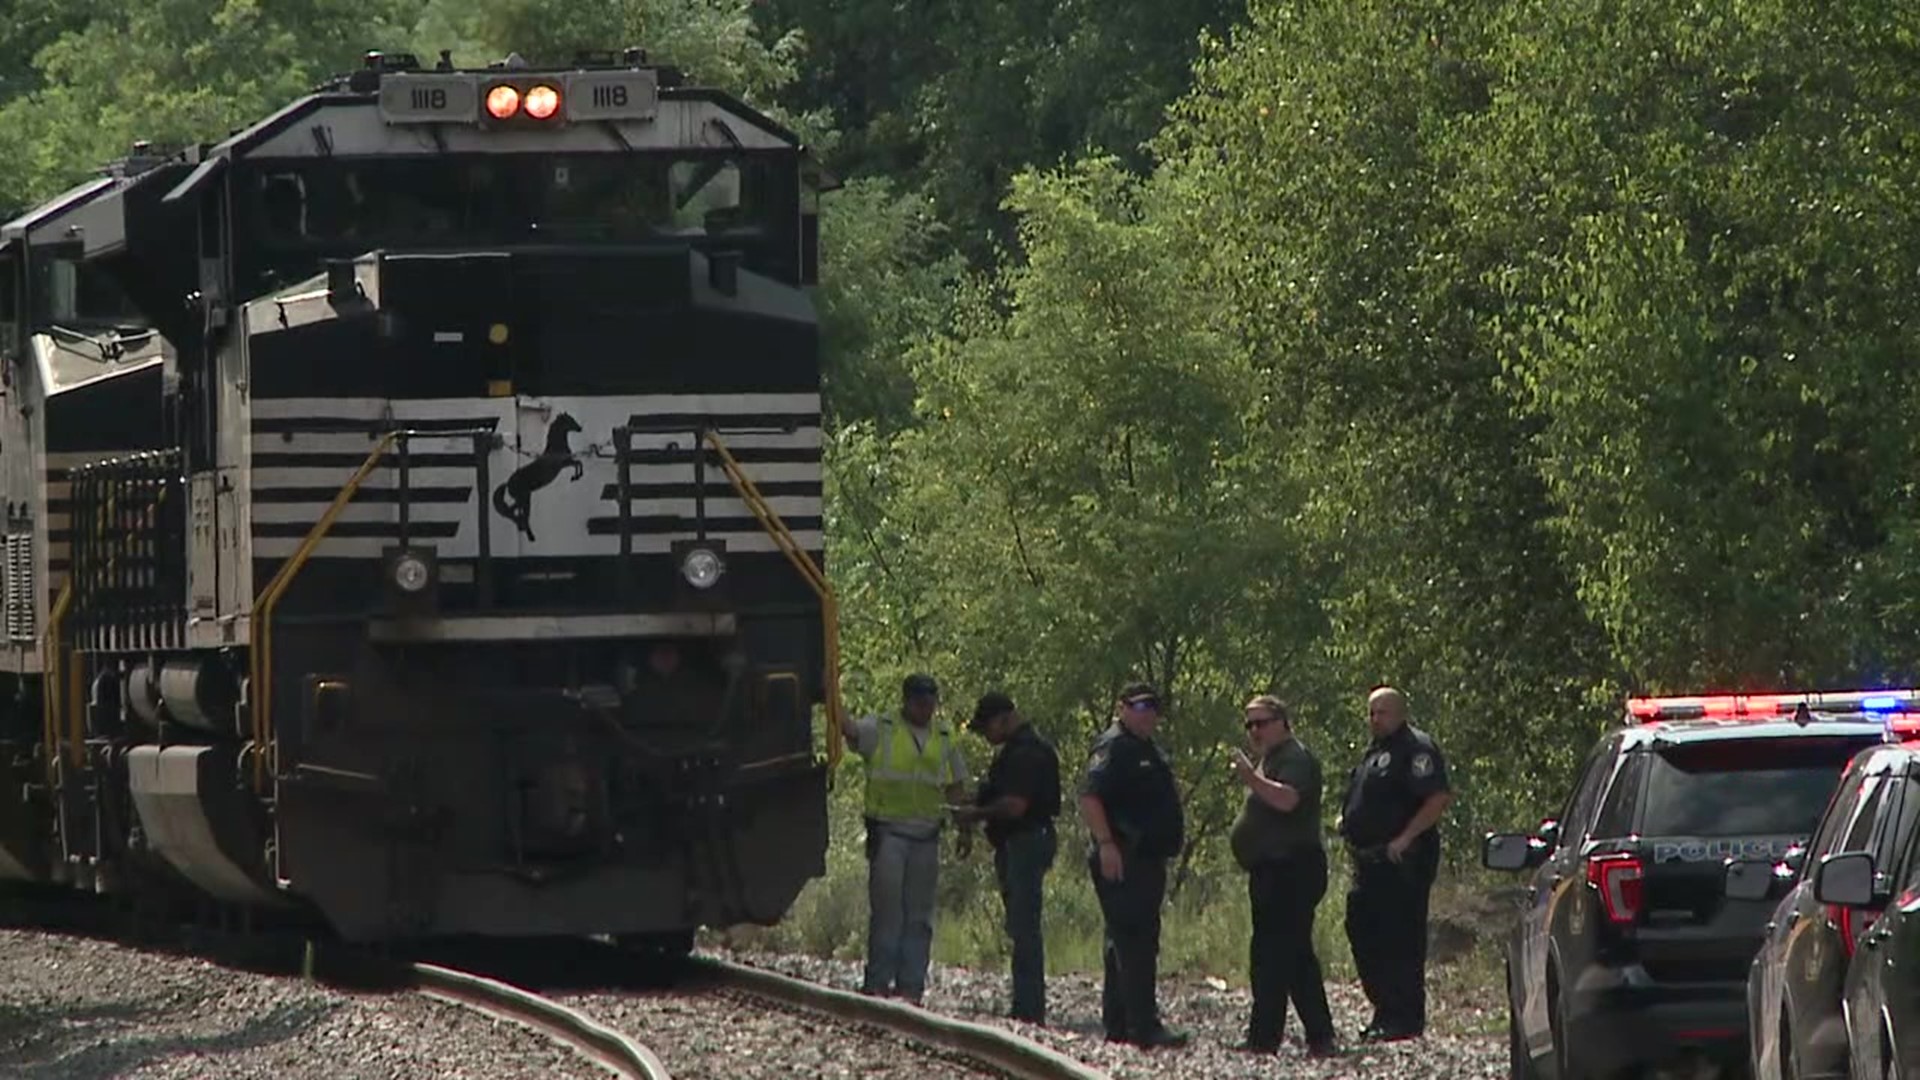 The train made a stop in Plains Township where the victim was found and pronounced dead by the coroner.